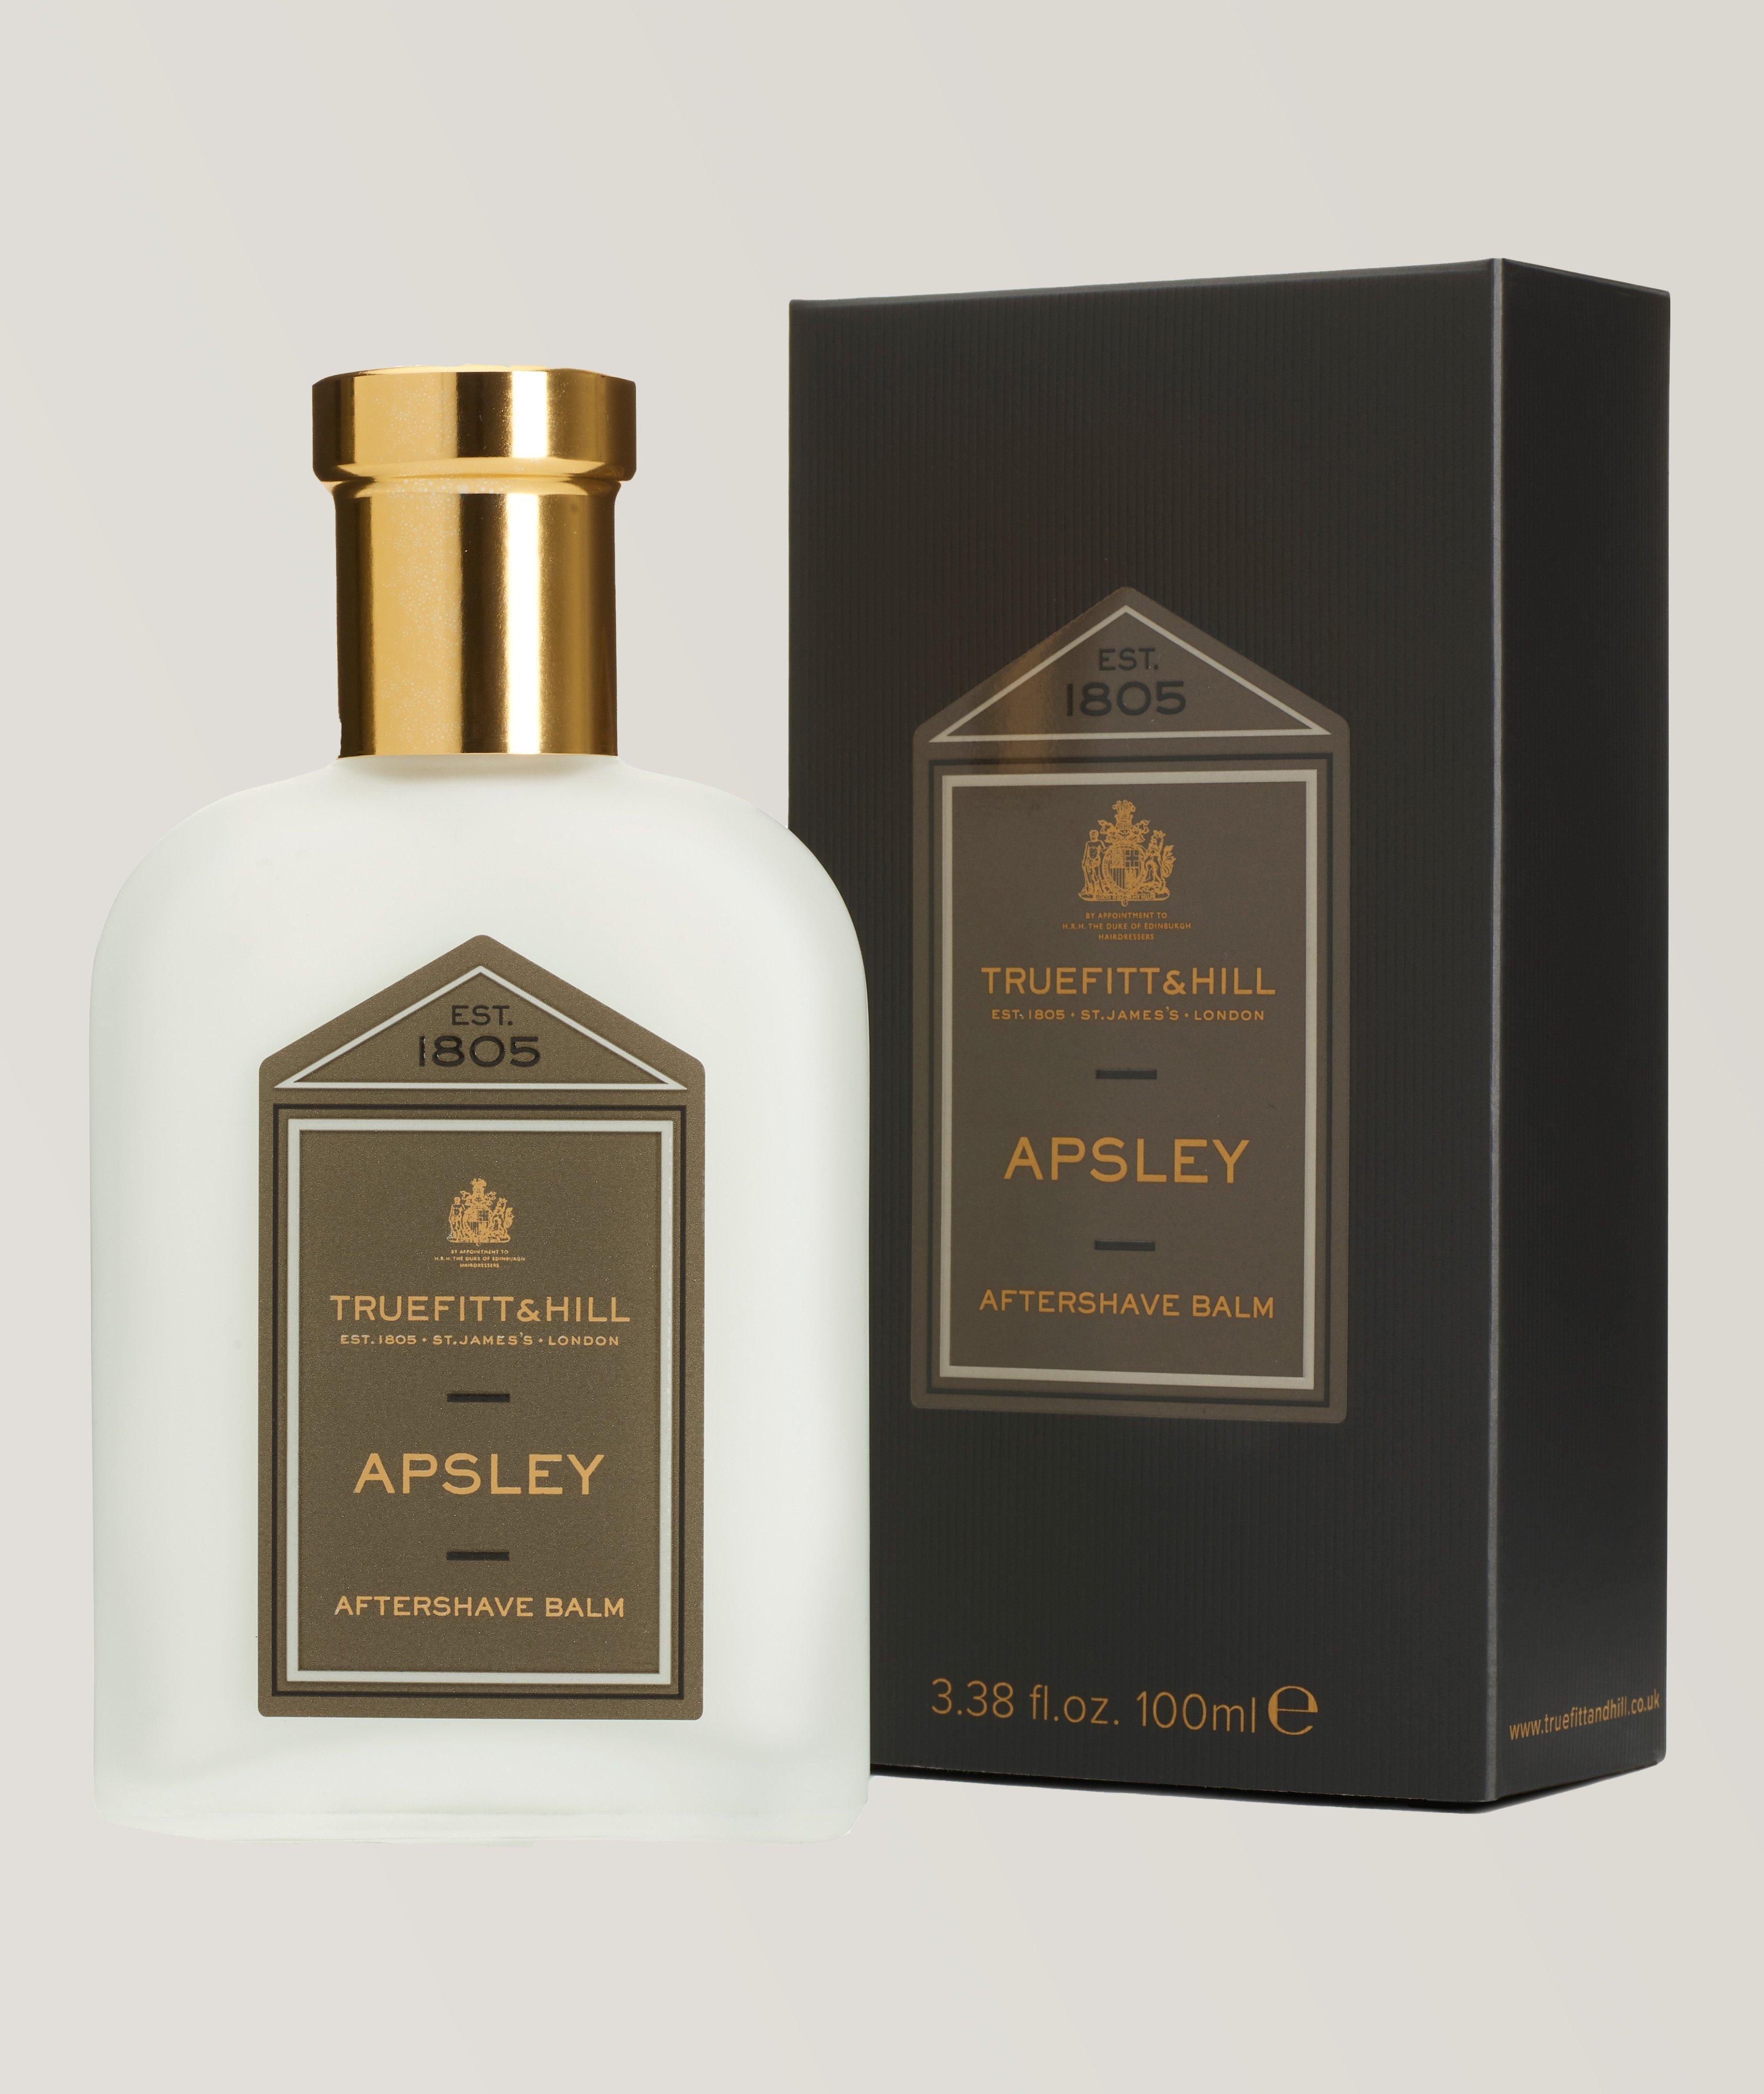 Apsley Aftershave Balm image 1